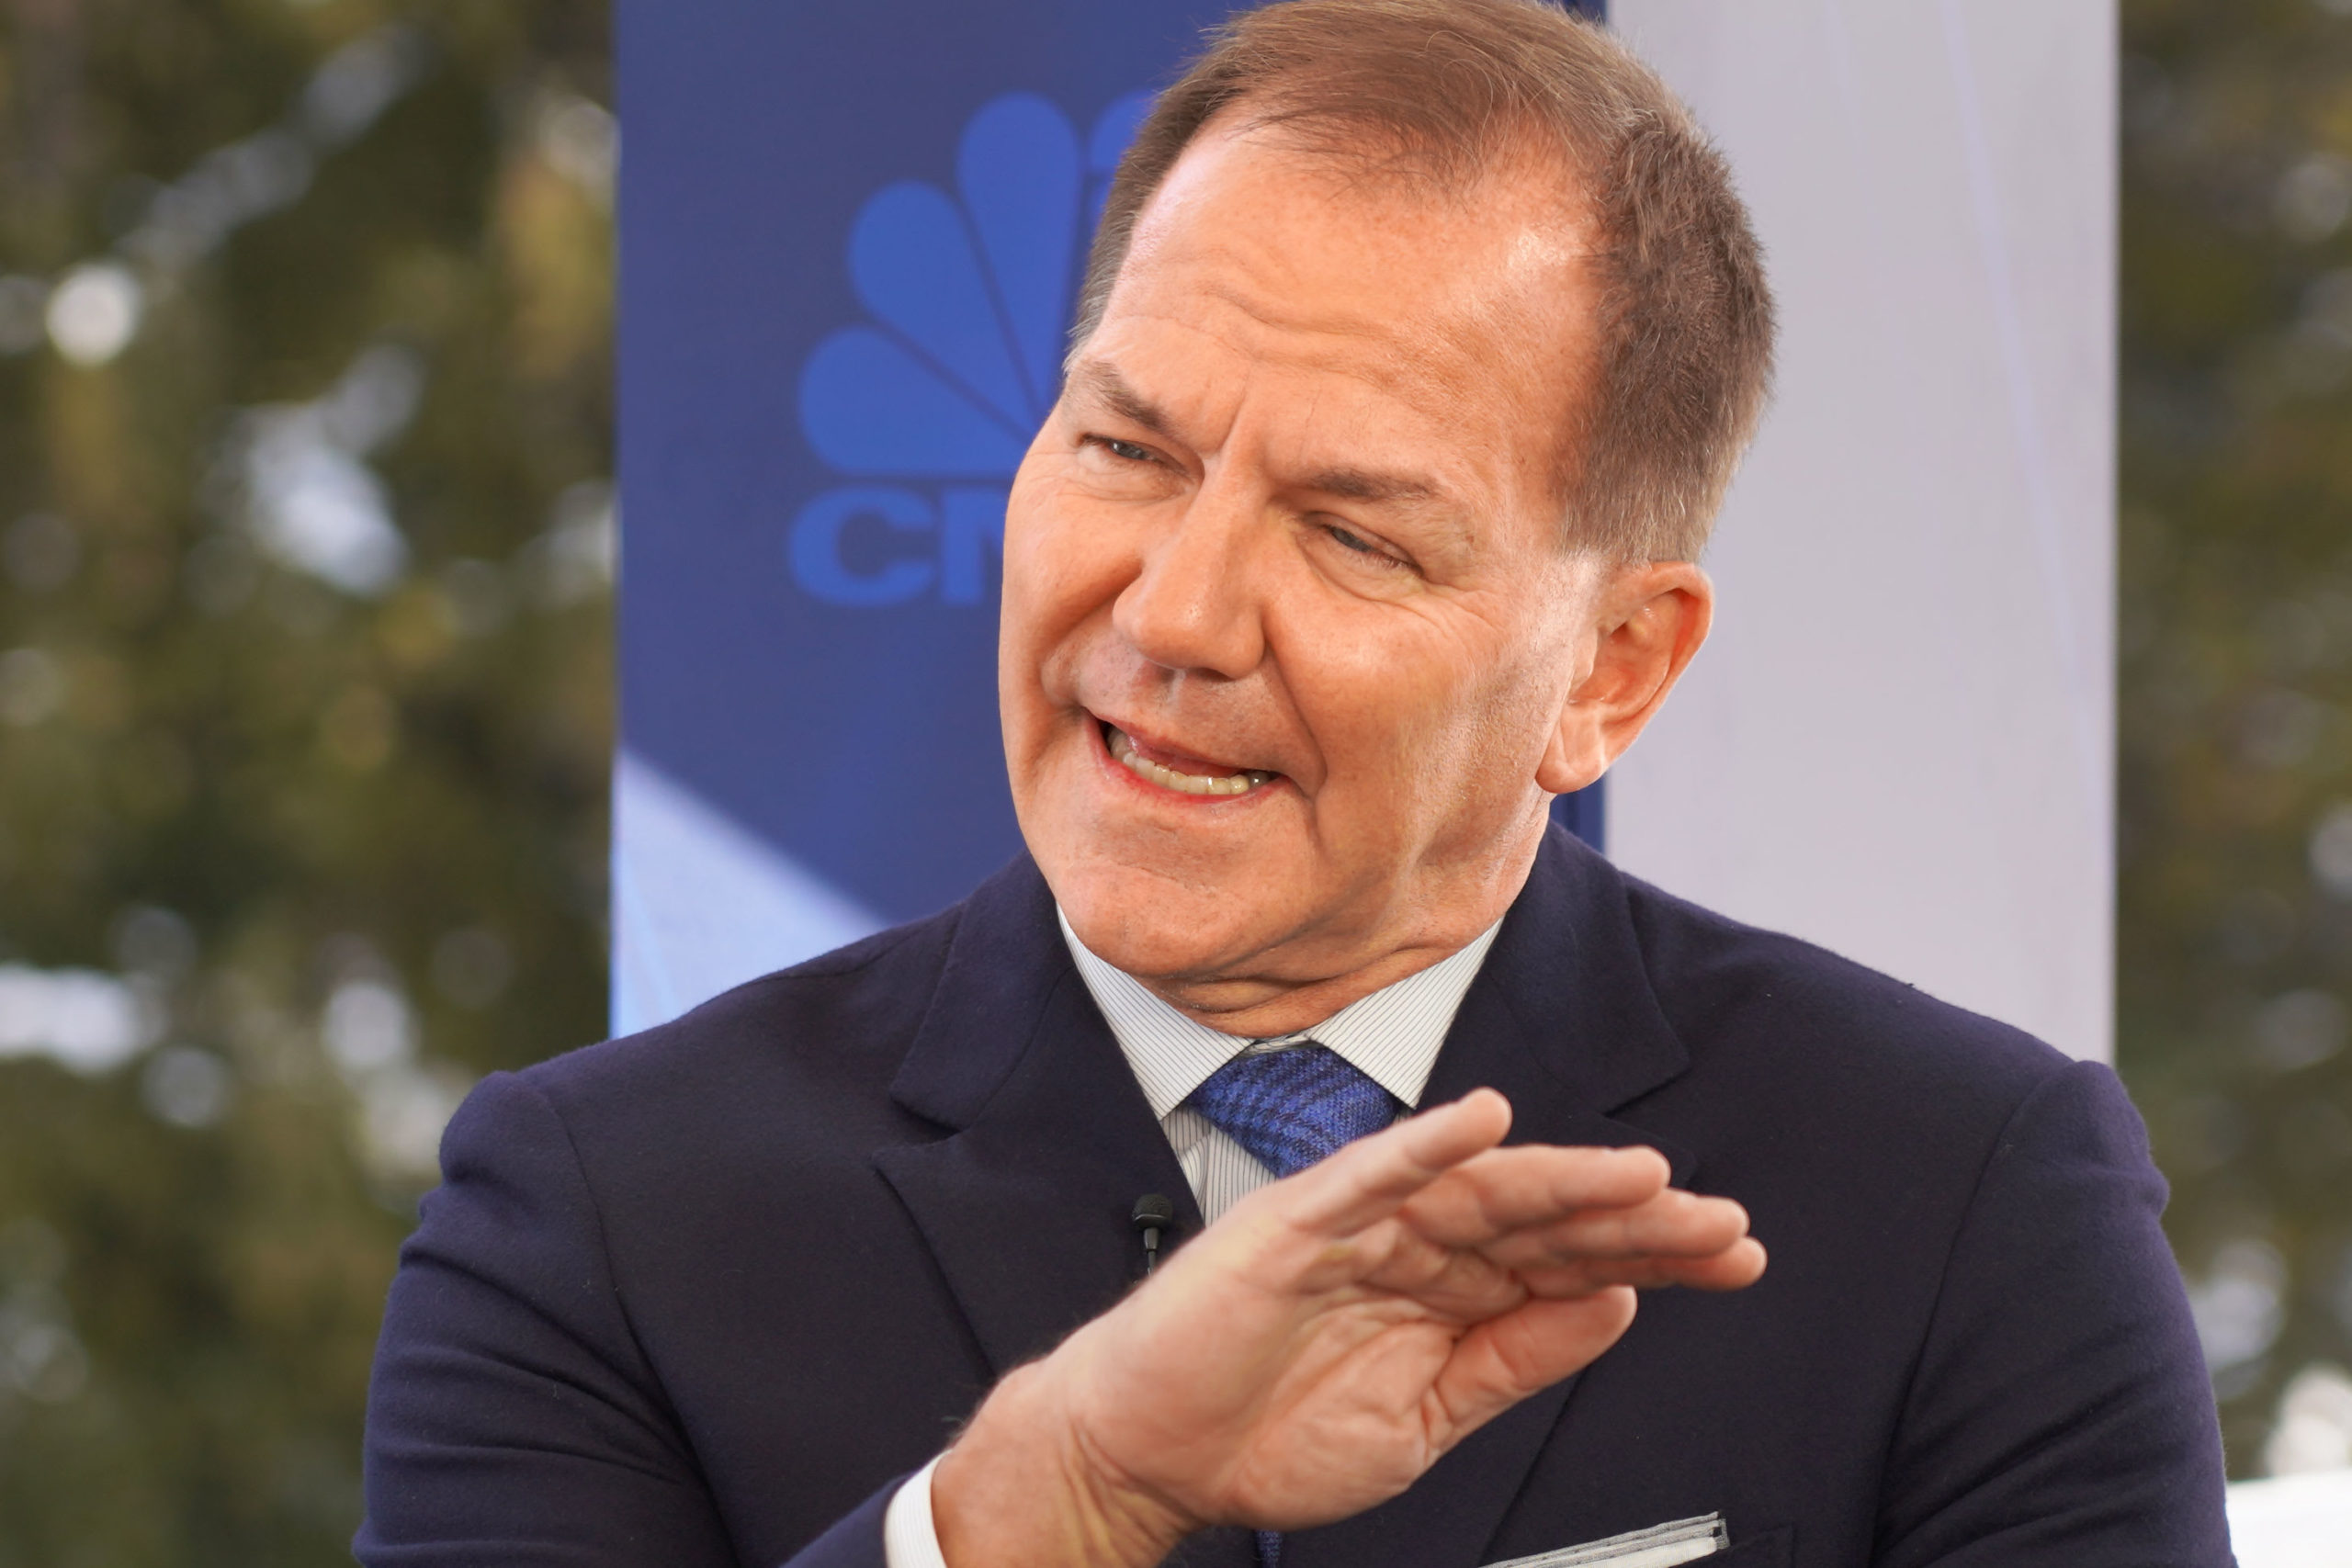 Paul Tudor Jones says this ‘loopy’ market reminds him of early ’99